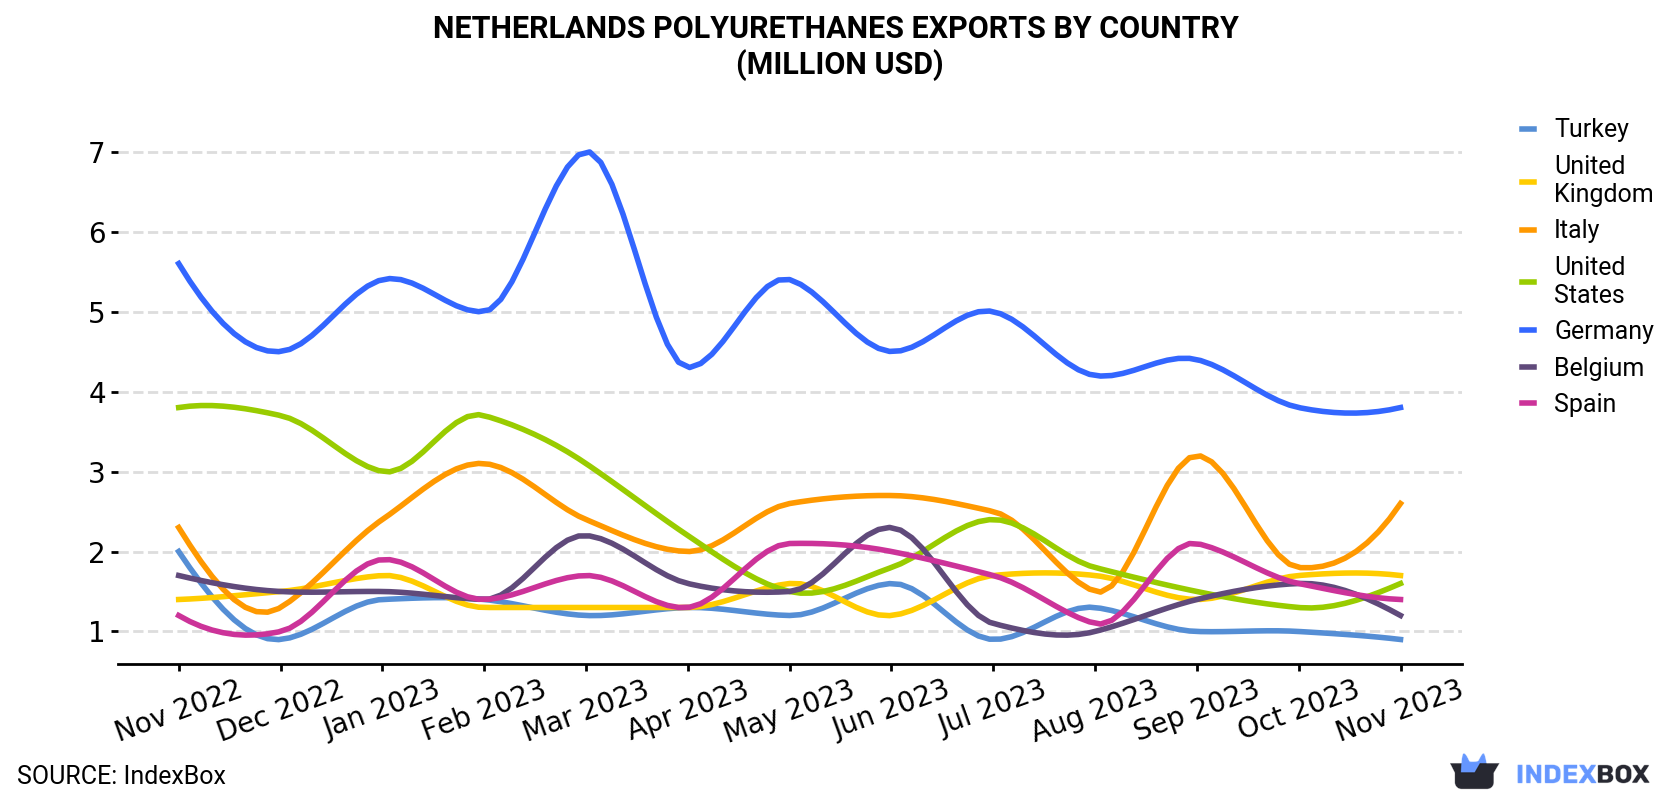 Netherlands Polyurethanes Exports By Country (Million USD)